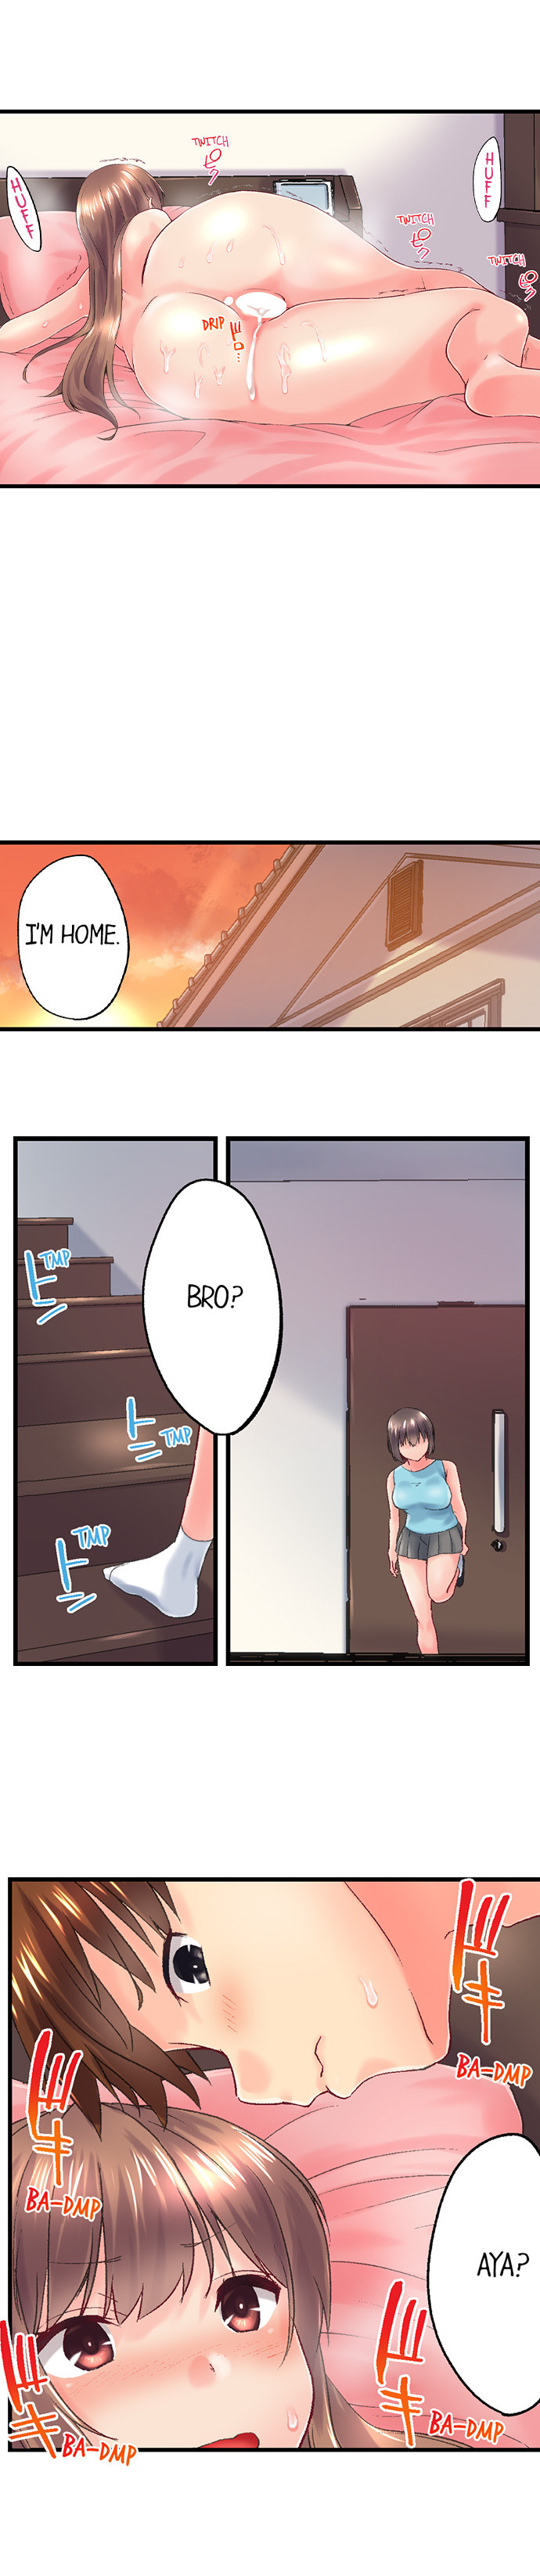 My Brother’s Slipped Inside Me in The Bathtub - Chapter 108 Page 9